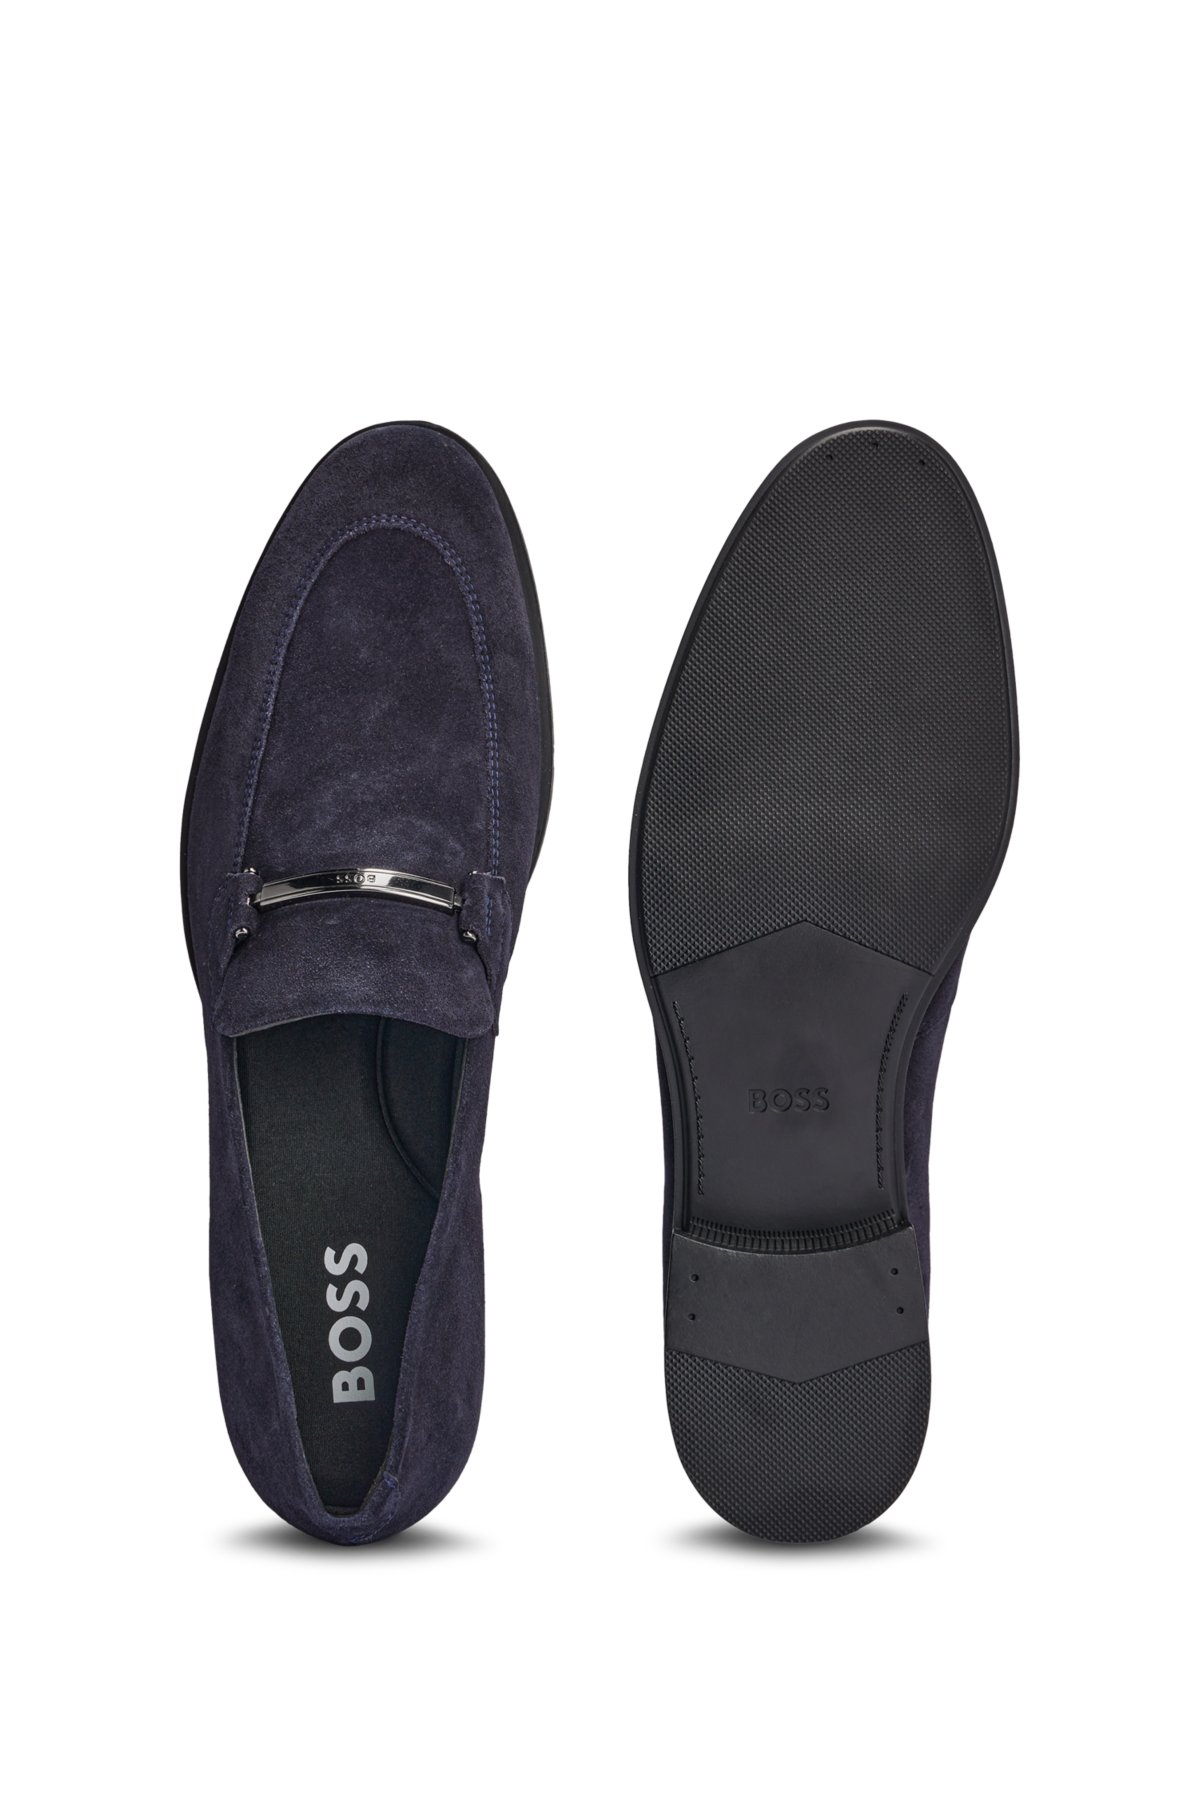 BOSS - Suede loafers with branded hardware trim